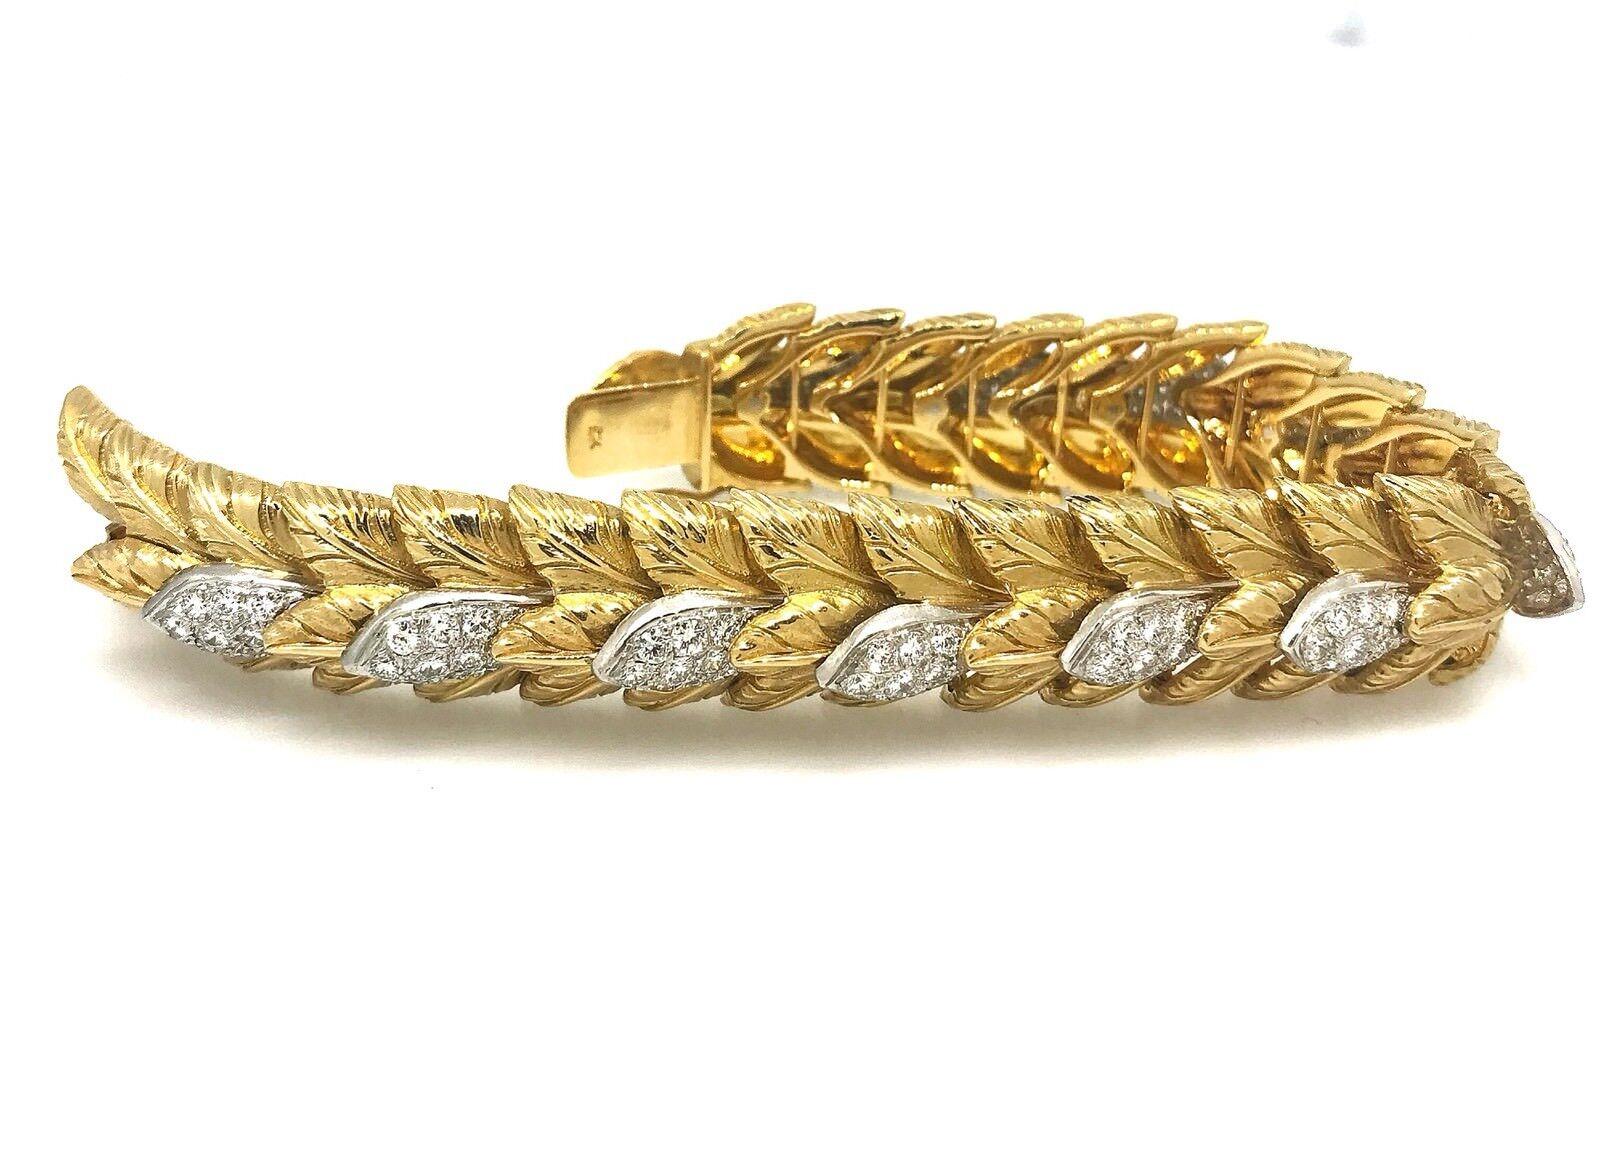 Heavy Vintage Carved Leaf Diamond Bracelet in 18k Yellow Gold In Excellent Condition For Sale In La Jolla, CA